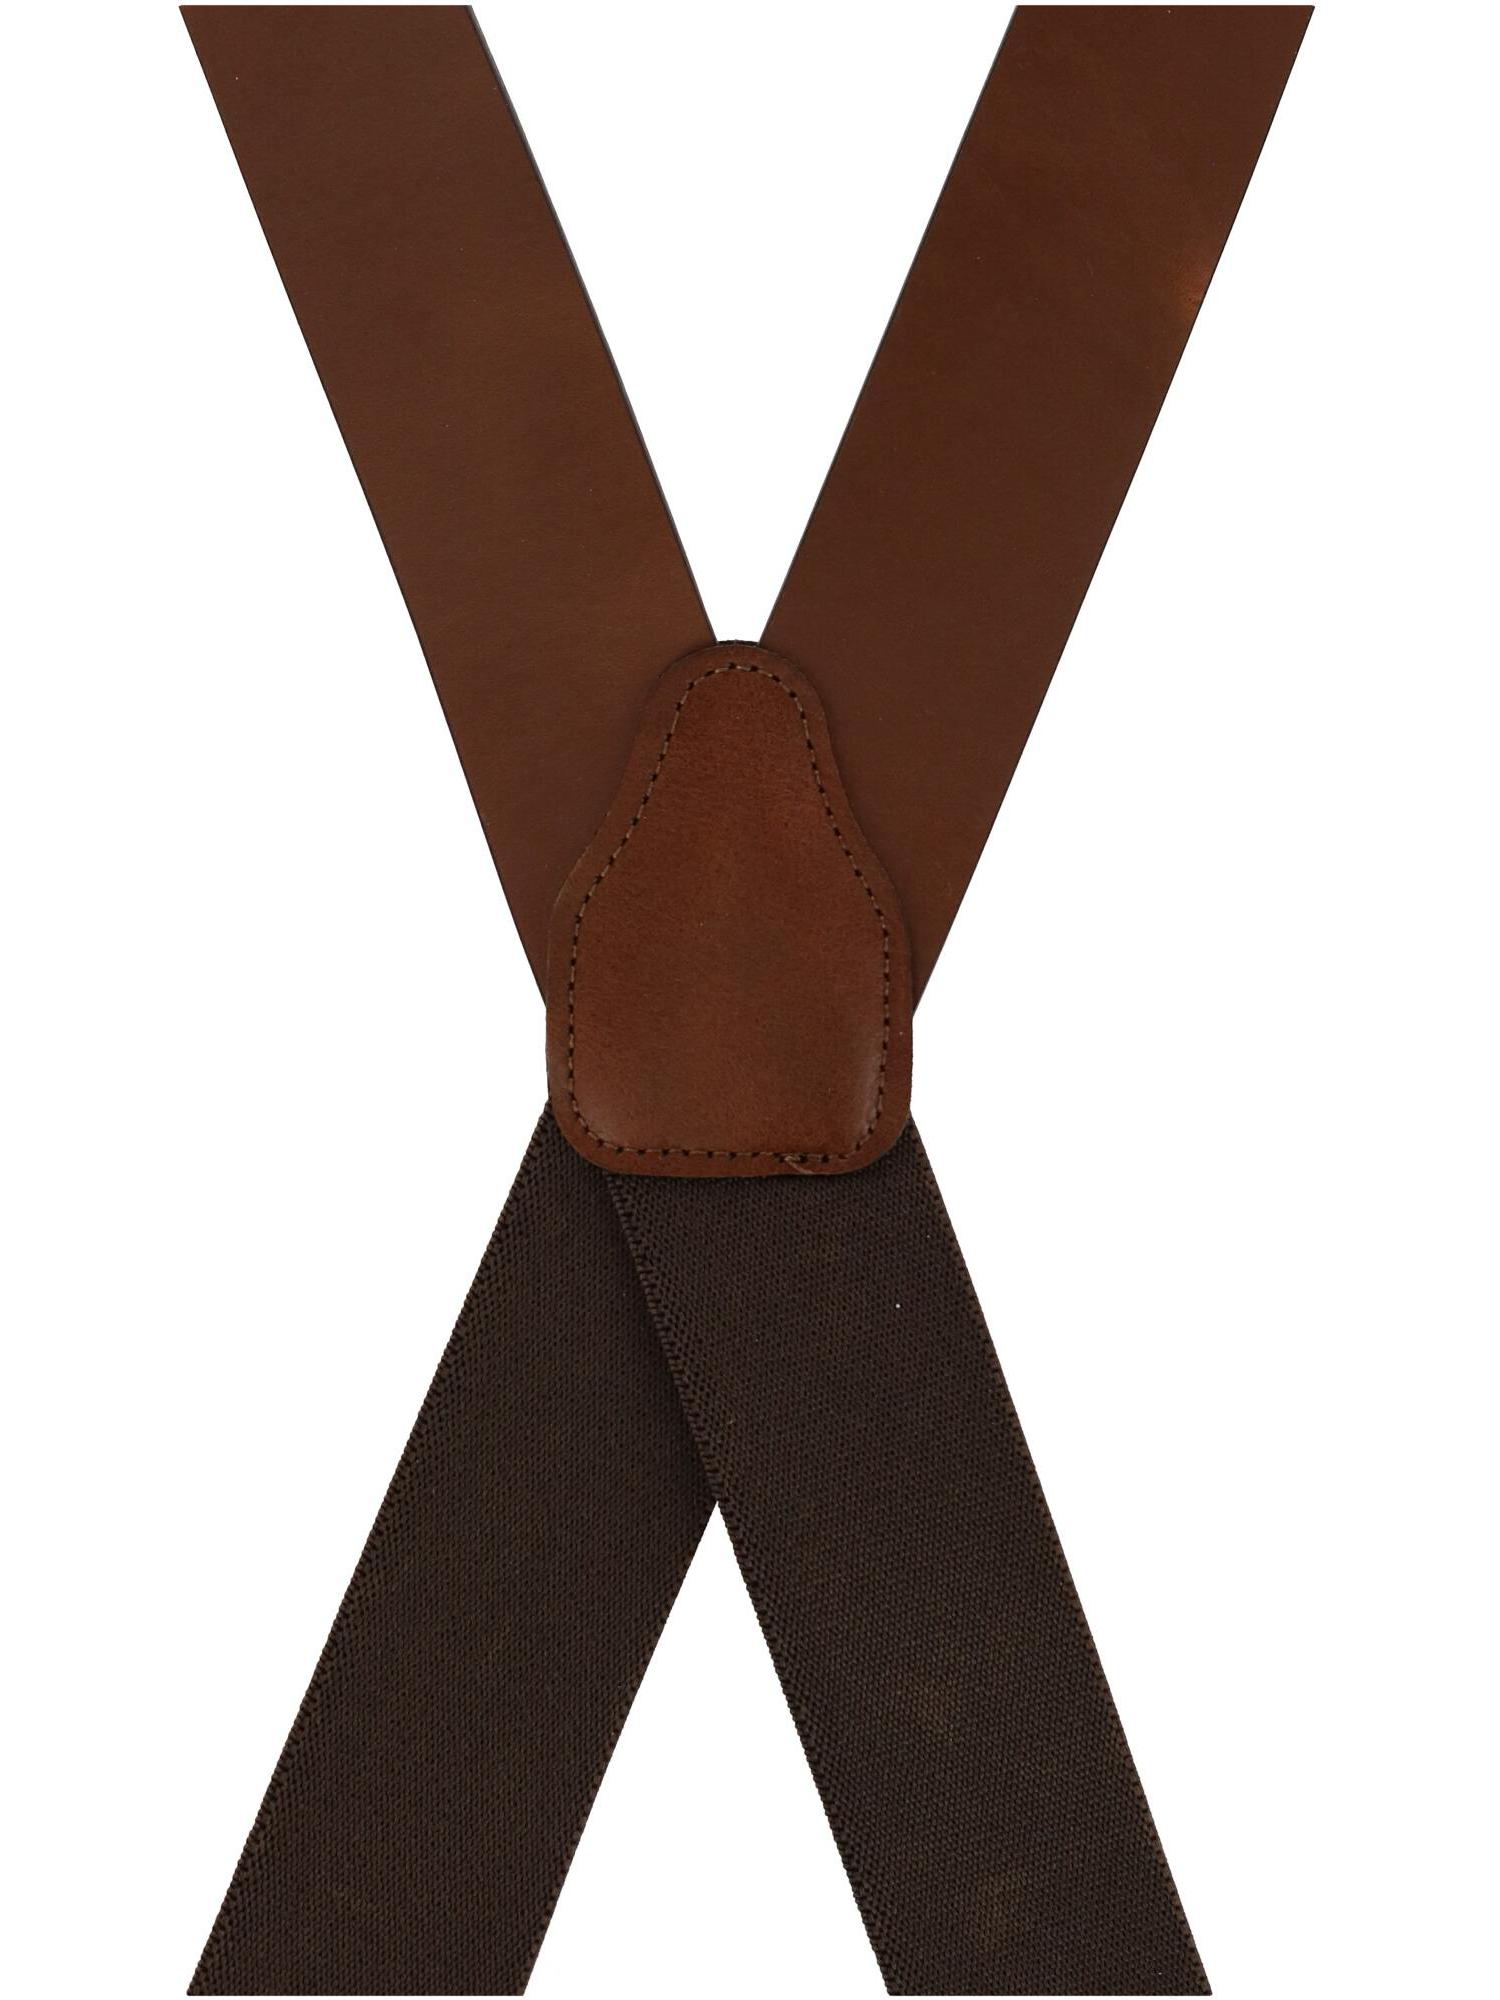 CTM  Wide Leather Suspenders with Swivel Hook Ends (Men Big & Tall) - image 3 of 4